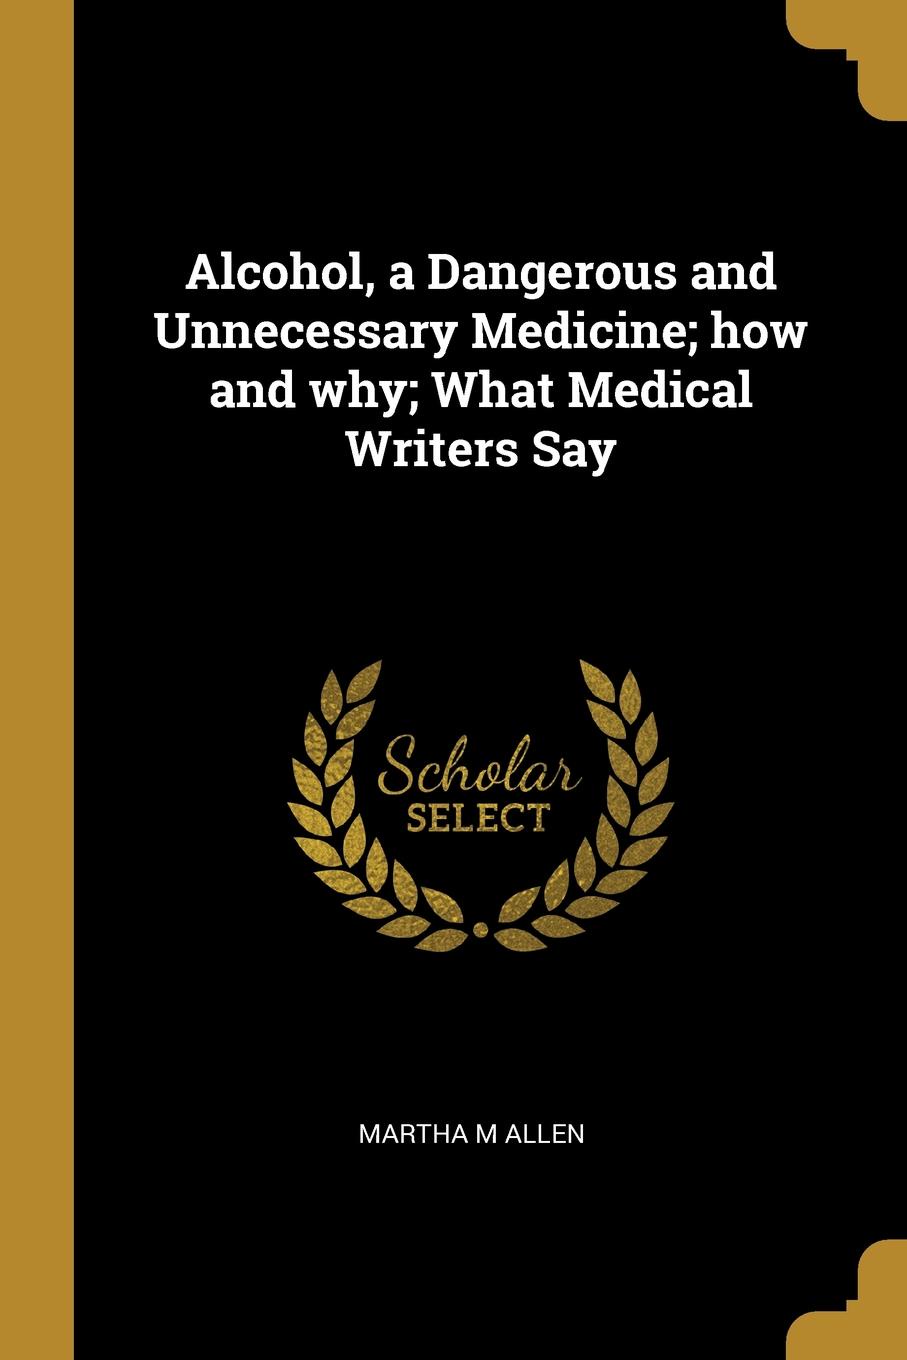 Alcohol, a Dangerous and Unnecessary Medicine; how and why; What Medical Writers Say